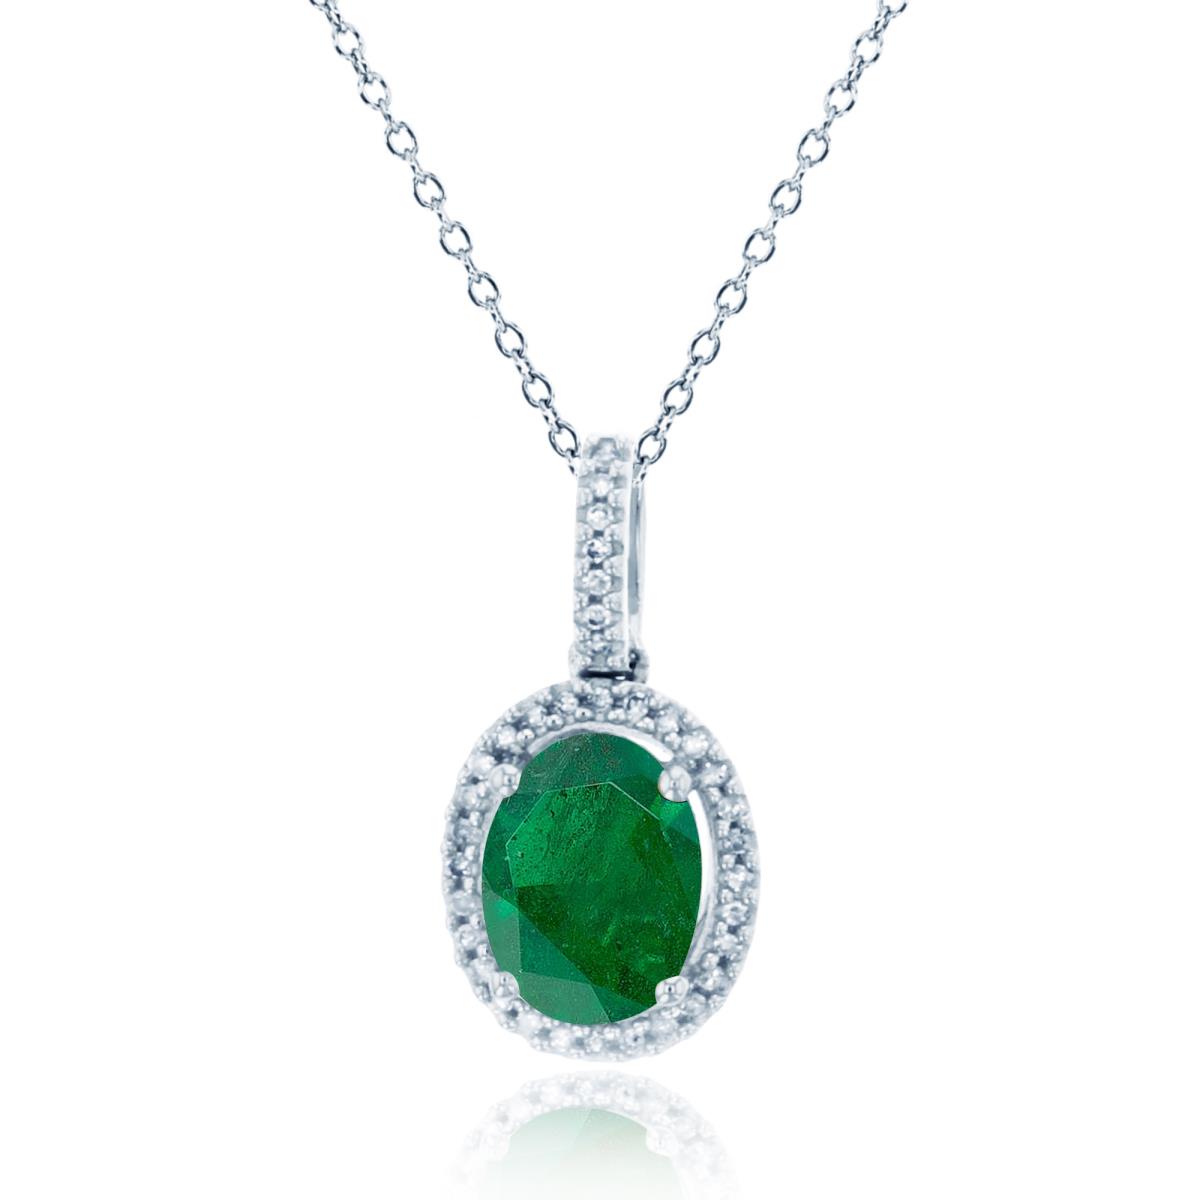 Silver Sterling Rhodium 8x6mm Ov Created Emerald & Rnd Created White Sapphire Oval Halo 18"Necklace